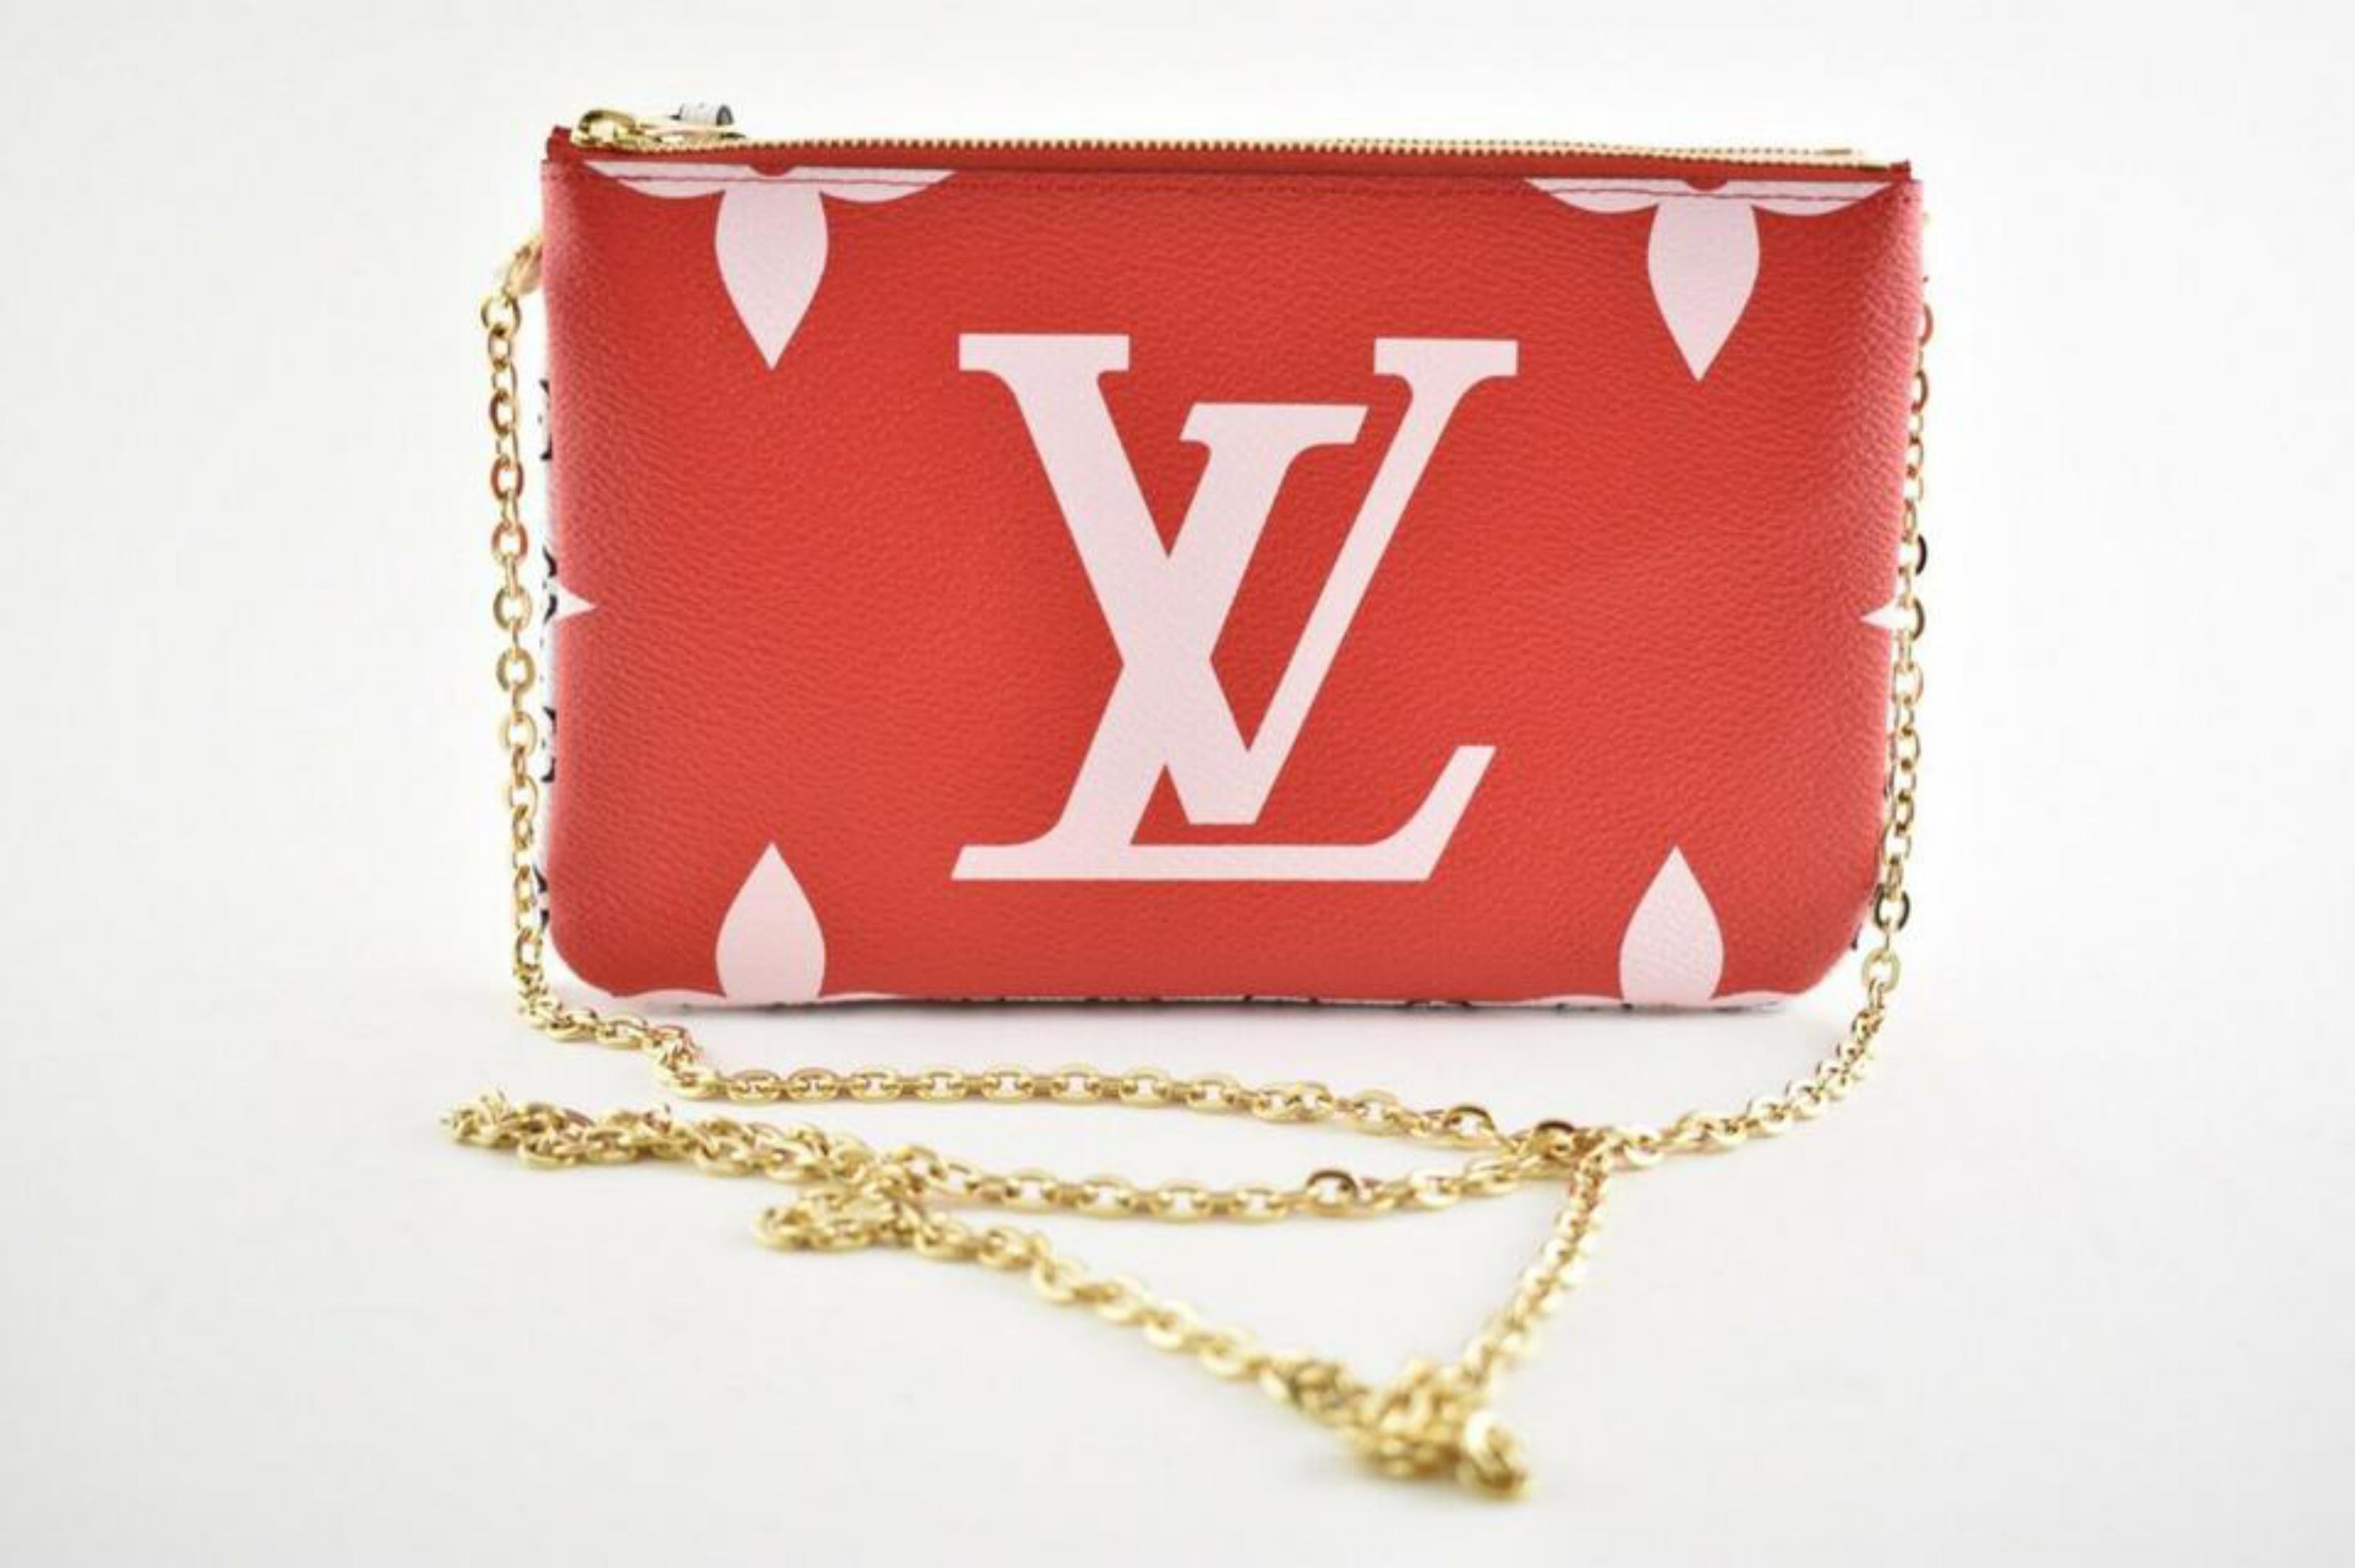 Louis Vuitton Pochette Giant Pink Double Zip Chain 870616 Red Cross Body Bag For Sale 3